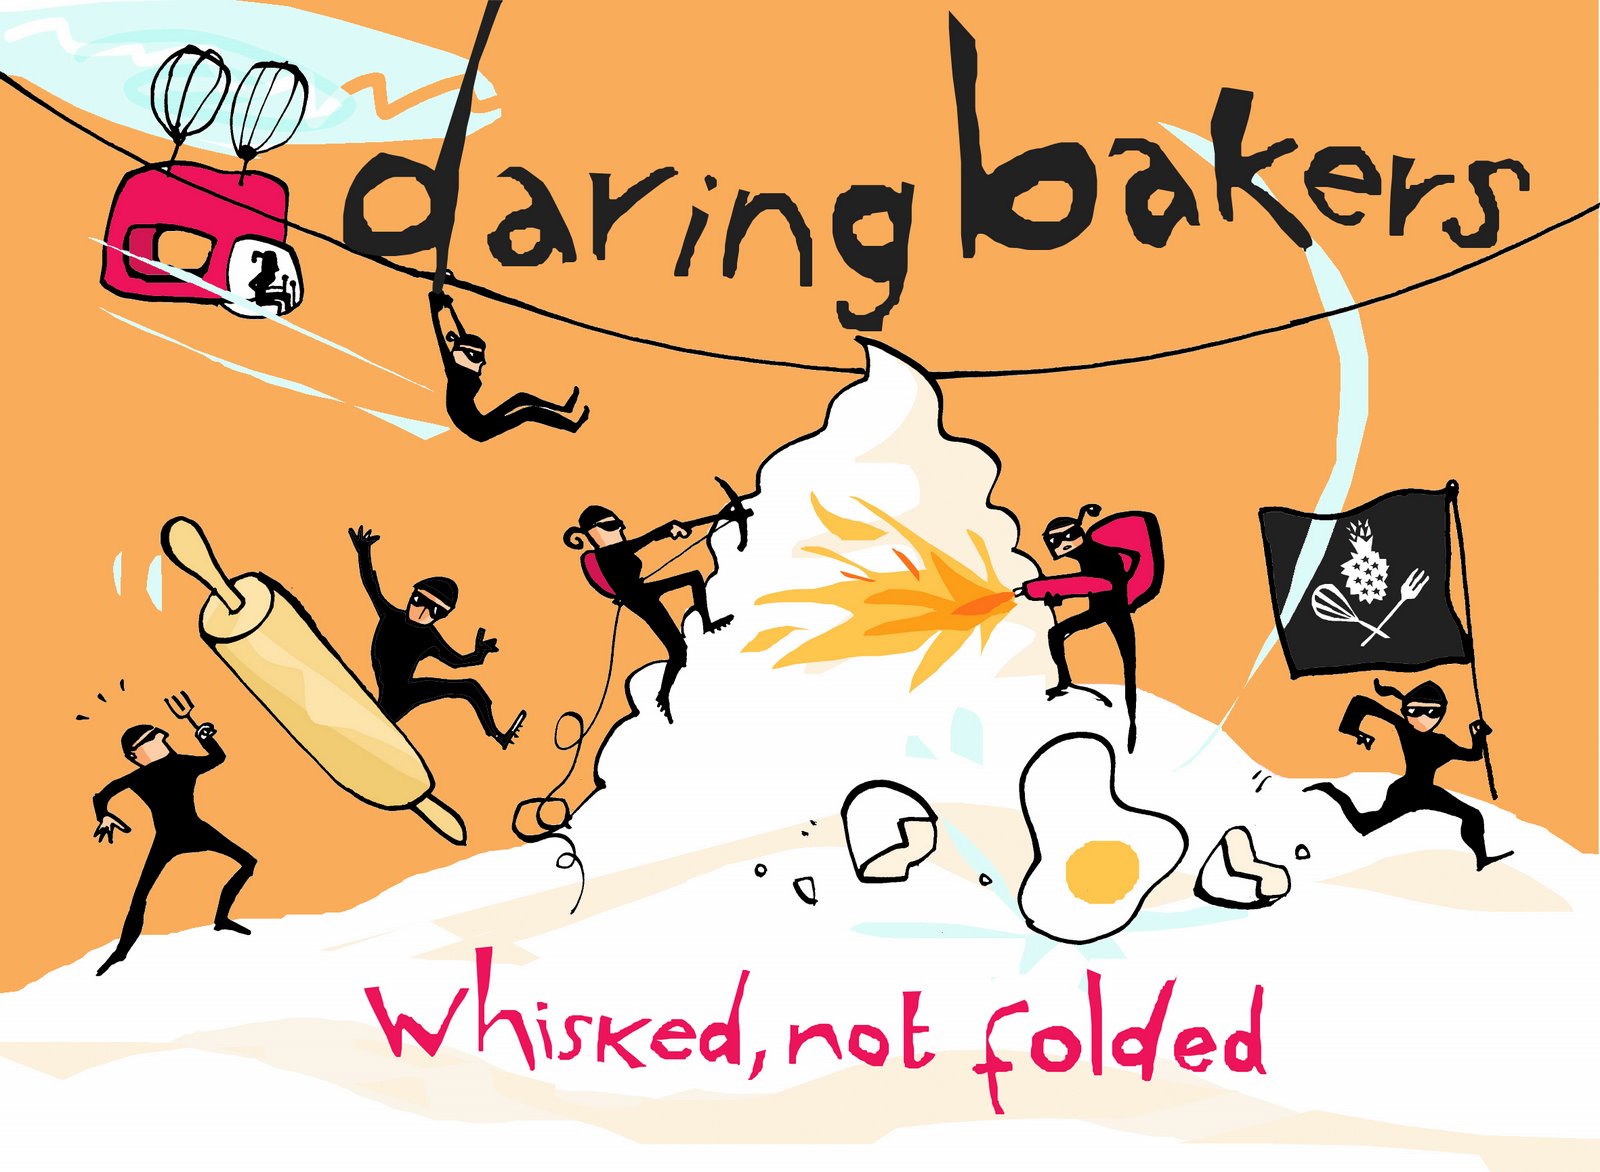 <a href="http://daringbakersblogroll.blogspot.com/">The Daring Bakers - Come Join Us!</a>